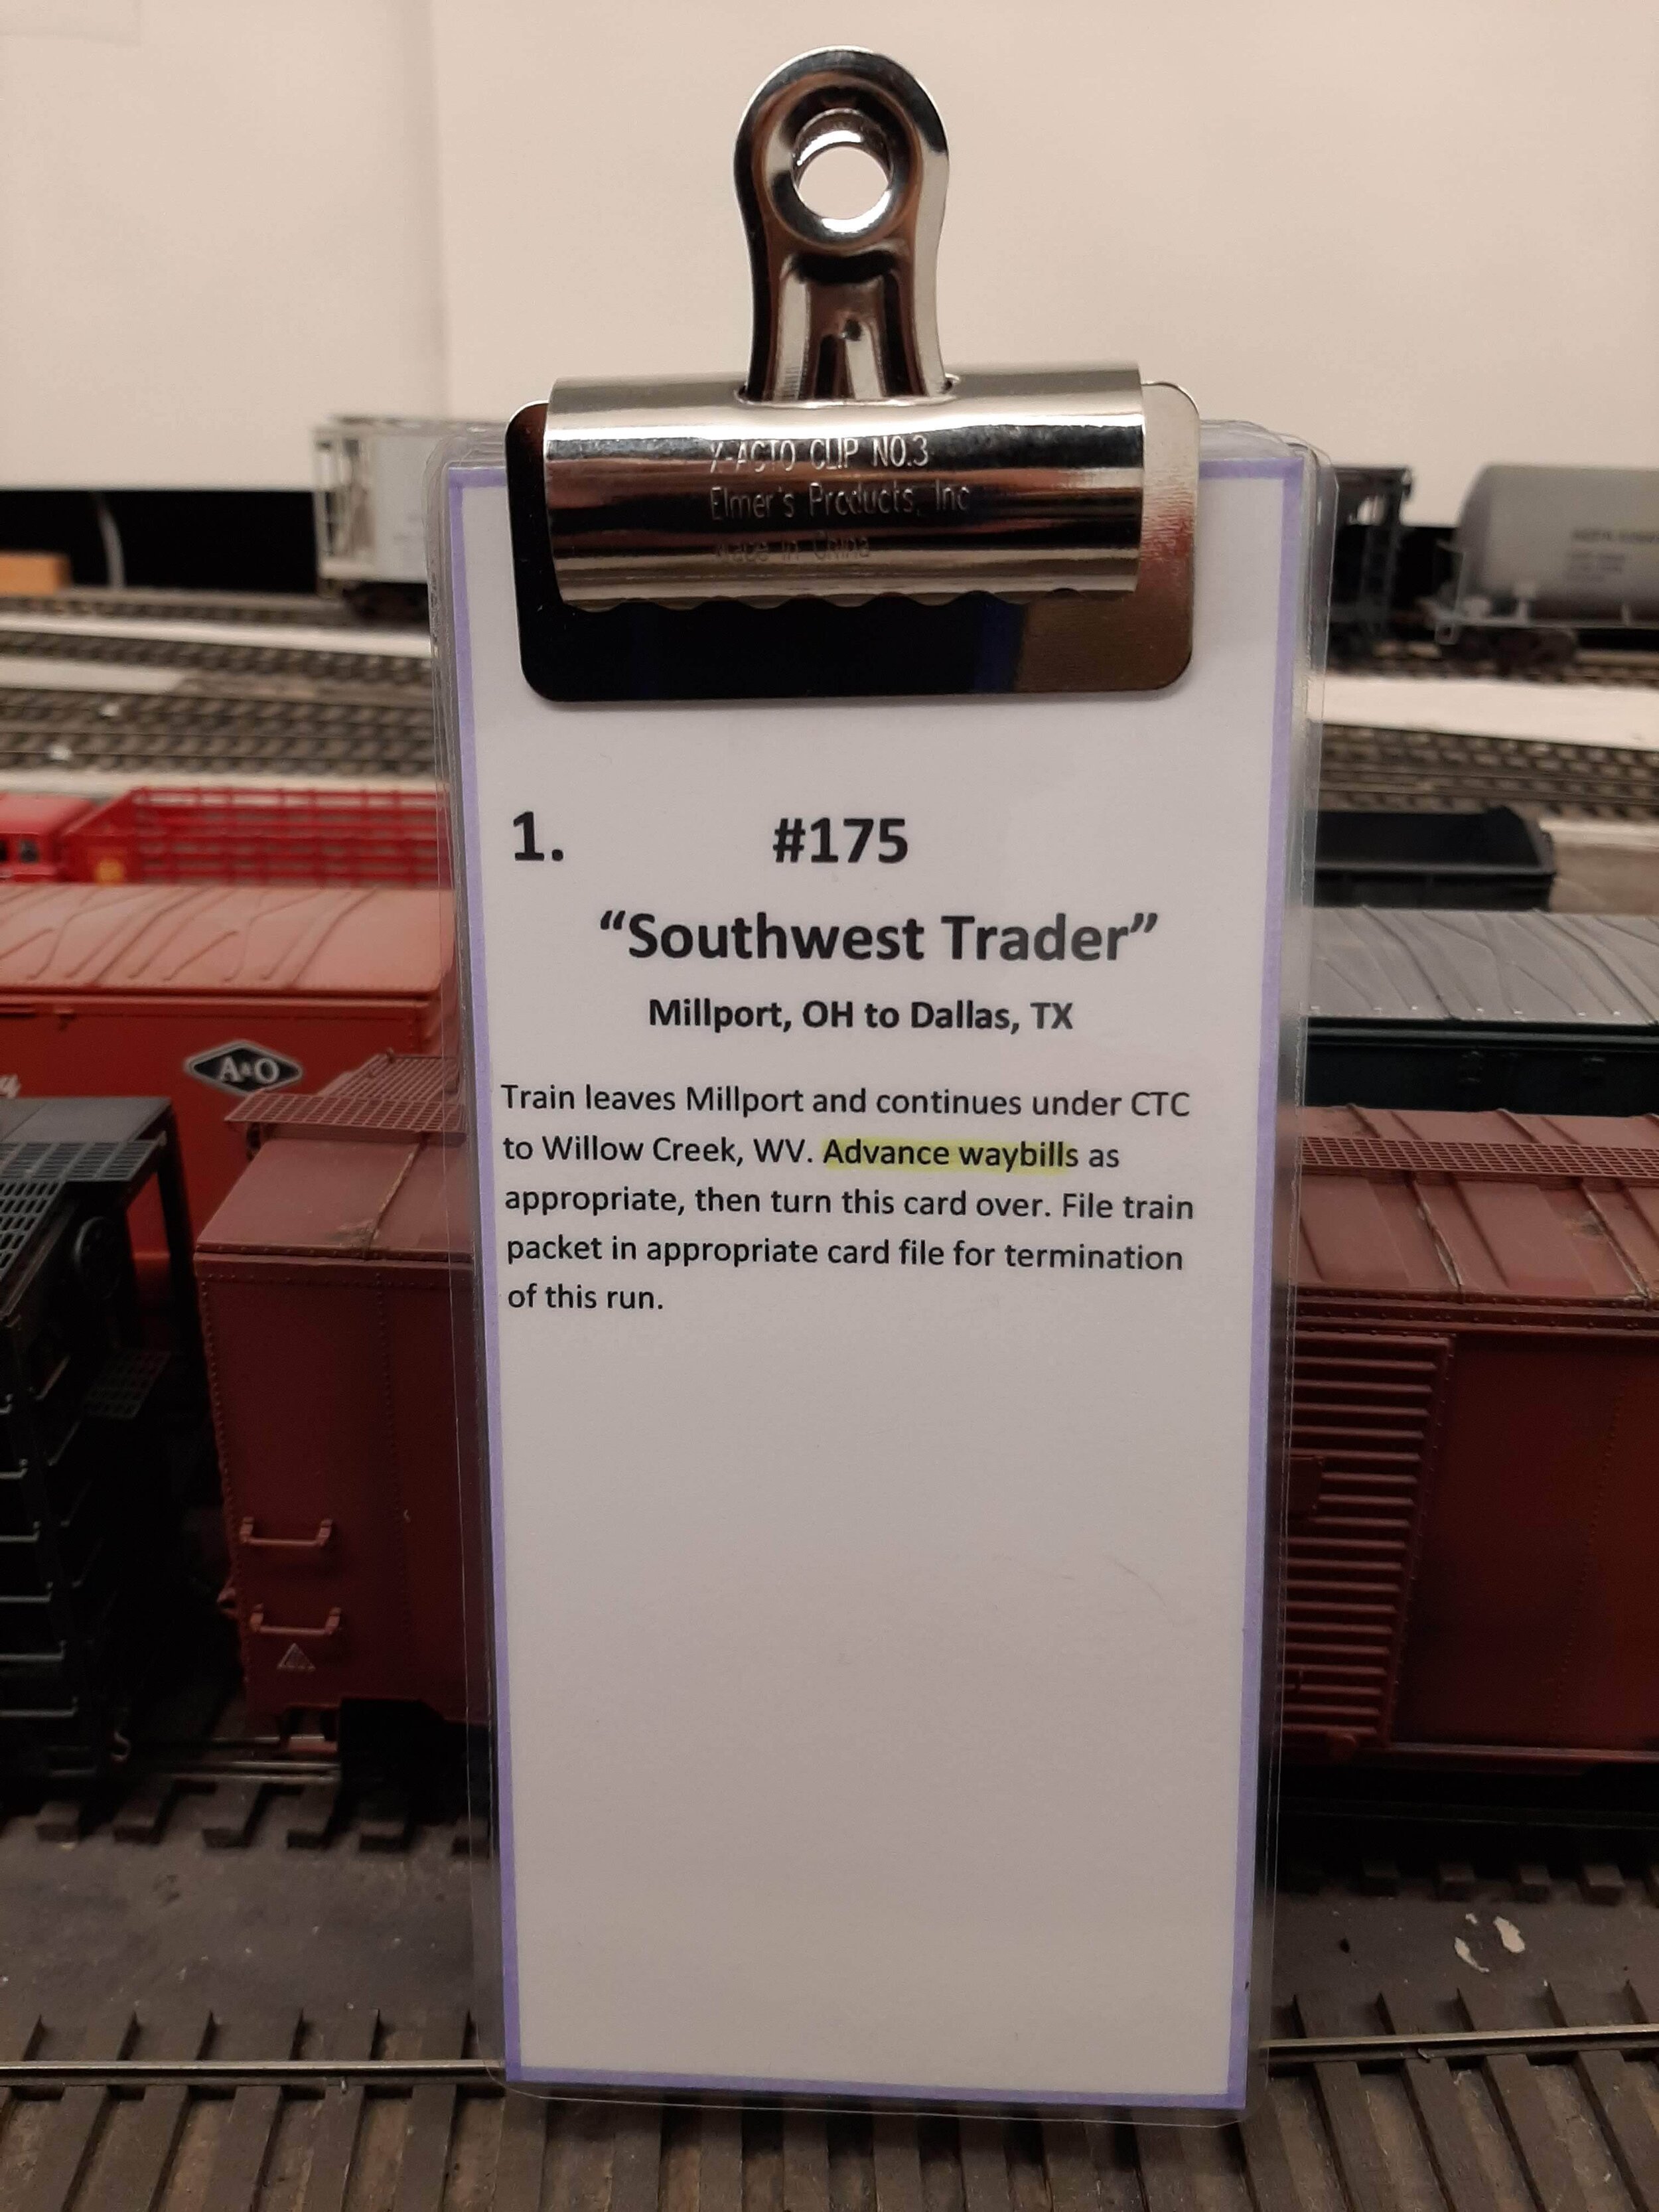  After sorting and pulling a string of cars for departure to Havens Yard, the caboose and motive power are added. A “Train Description Card” is placed on top and a bulldog clip holds the Train Packet together for the departing crew. 